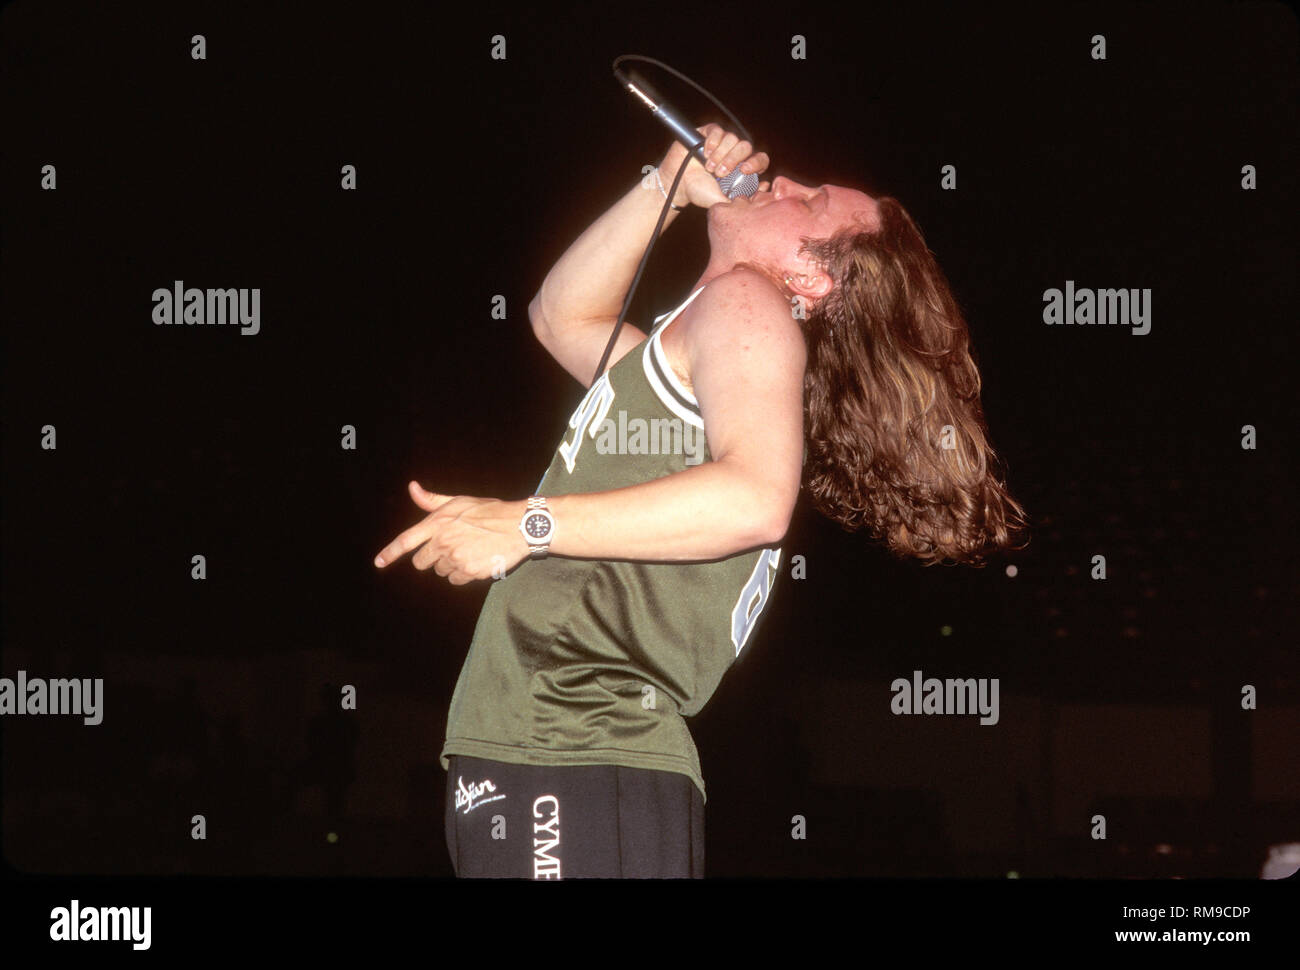 Candlebox vocalist Kevin Martin is shown on stage during a 'live' concert performance. Stock Photo